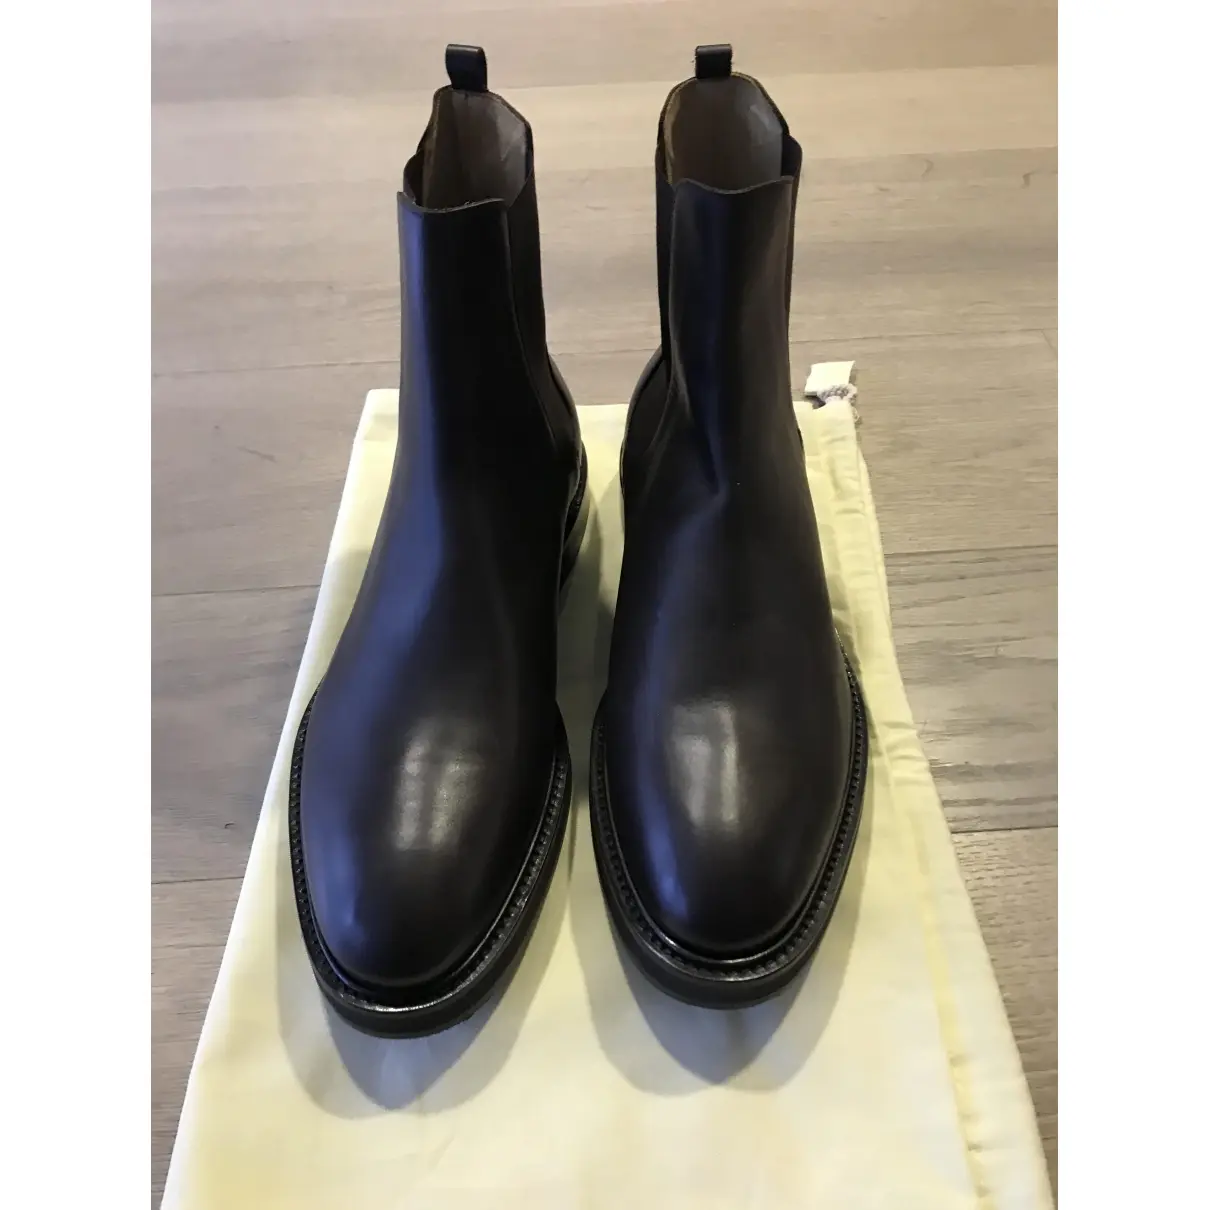 Buy Sutor Mantellassi Leather boots online